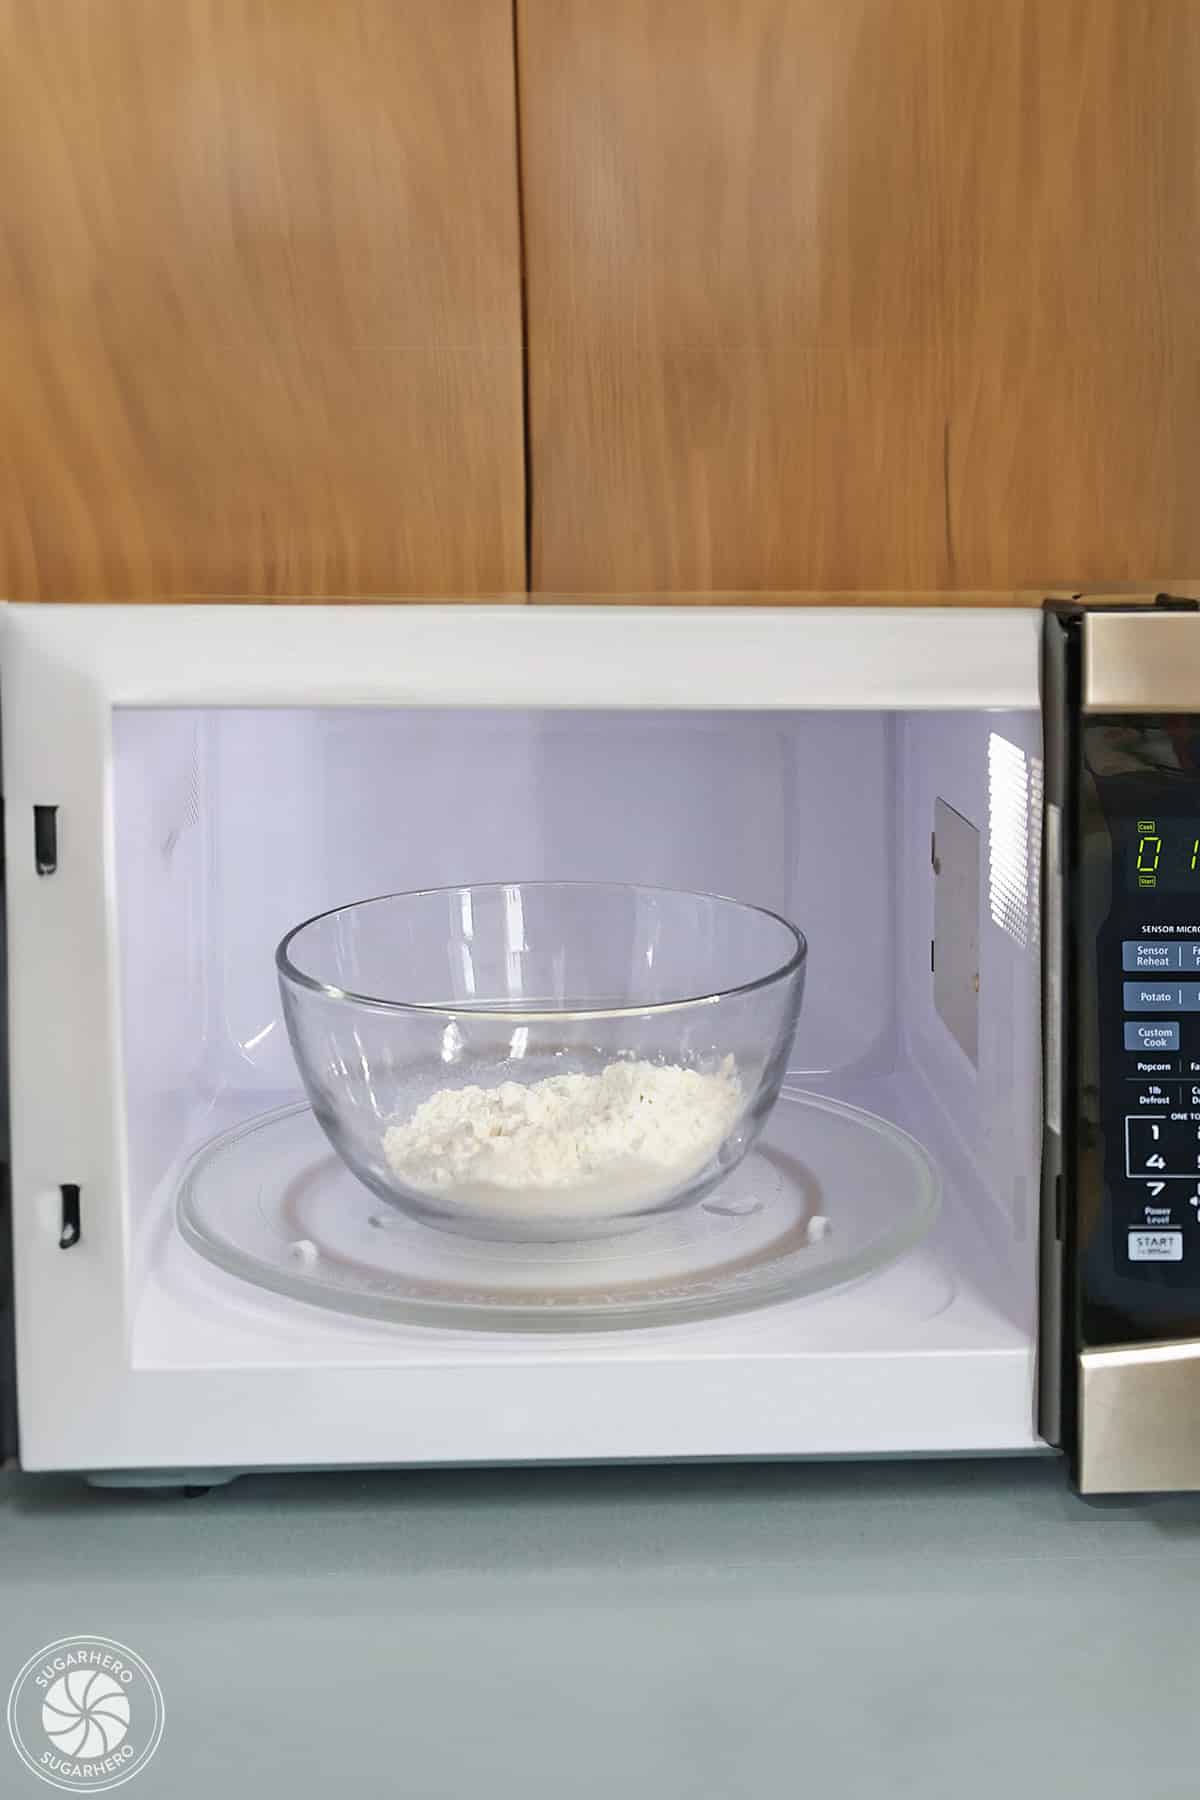 Flour in a glass bowl set in a microwave with the time set for 1 minute.